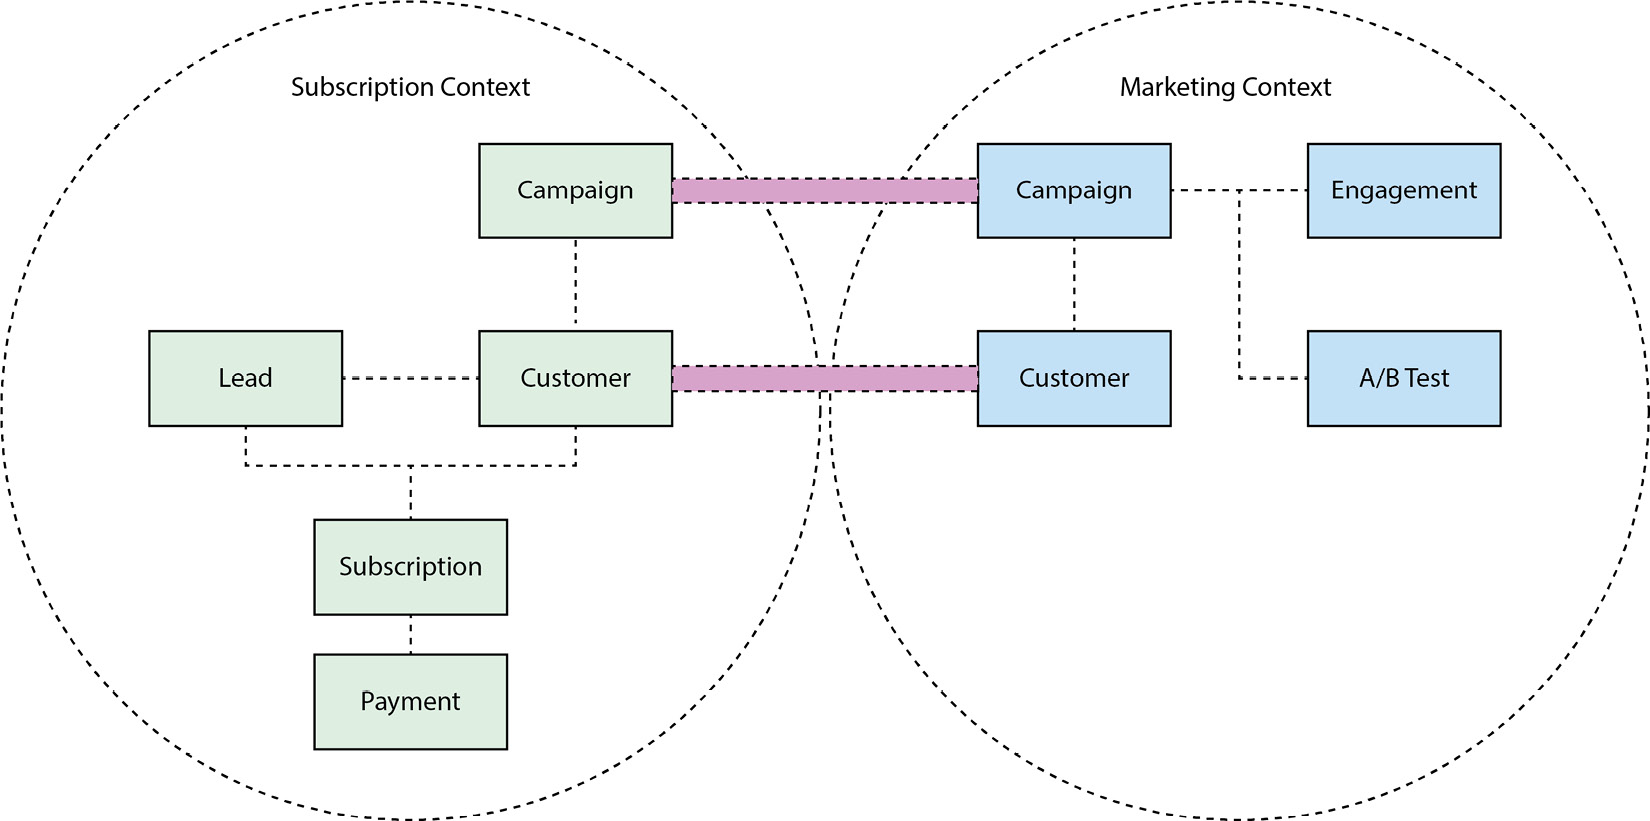  Figure 2.3 – Mapping between marketing and subscription contexts
